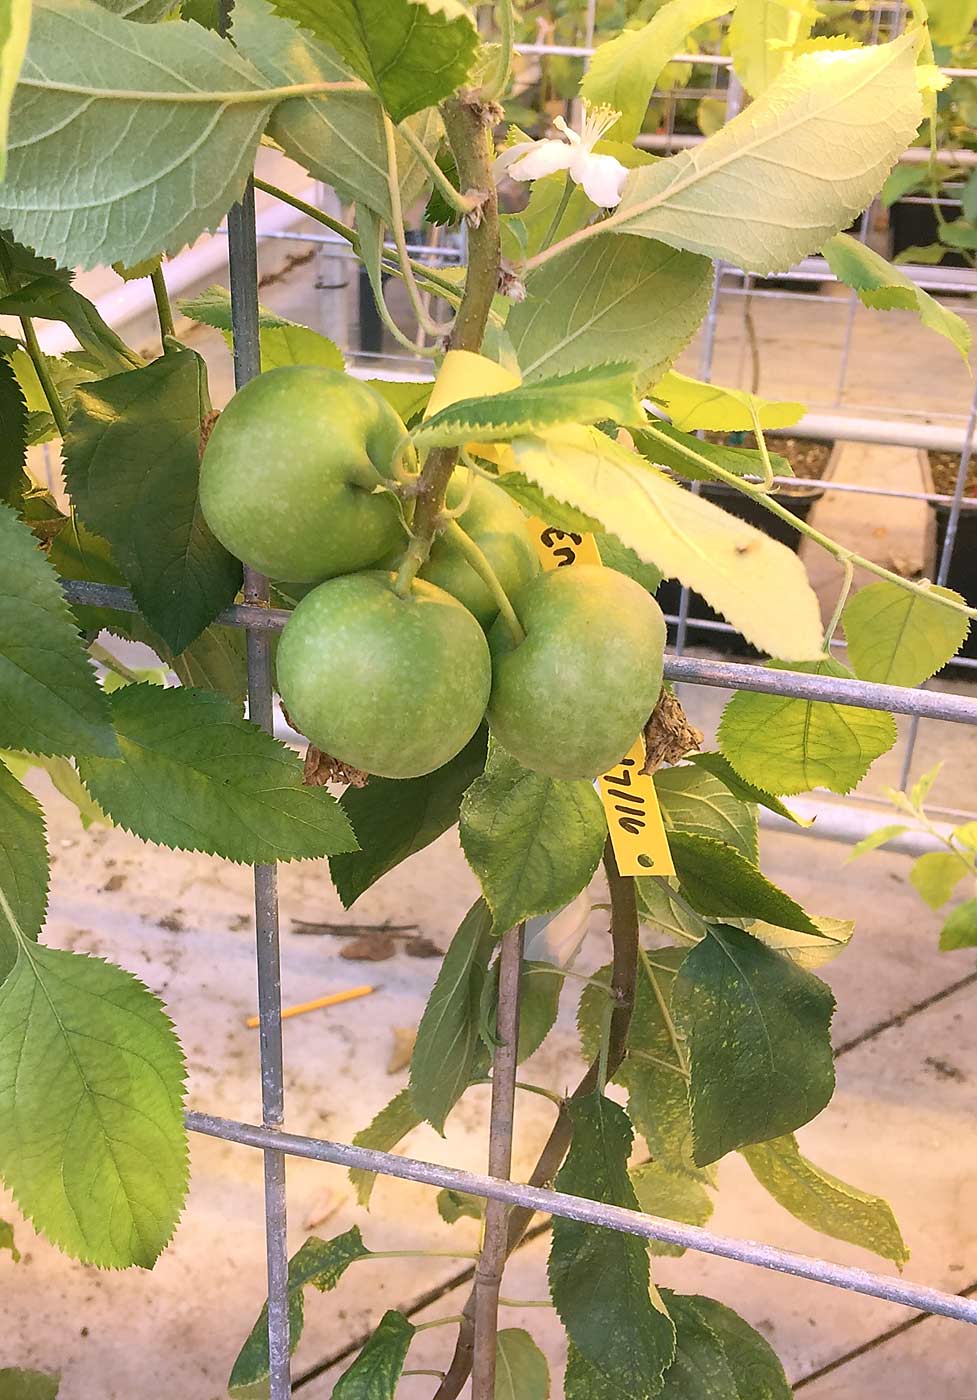 One-year-old apple trees are fruiting, thanks to an early-flowering gene that accelerates the crossbreeding process. These trees are the second generation of a cross to bring blue mold resistance from a wild apple ancestor into a modern cultivar. This fruit will be exposed to blue mold to verify that the DNA test scientists are using in the breeding program is accurate. <b>(Courtesy Jay Norelli, USDA Appalachian Fruit Research Laboratory)</b>